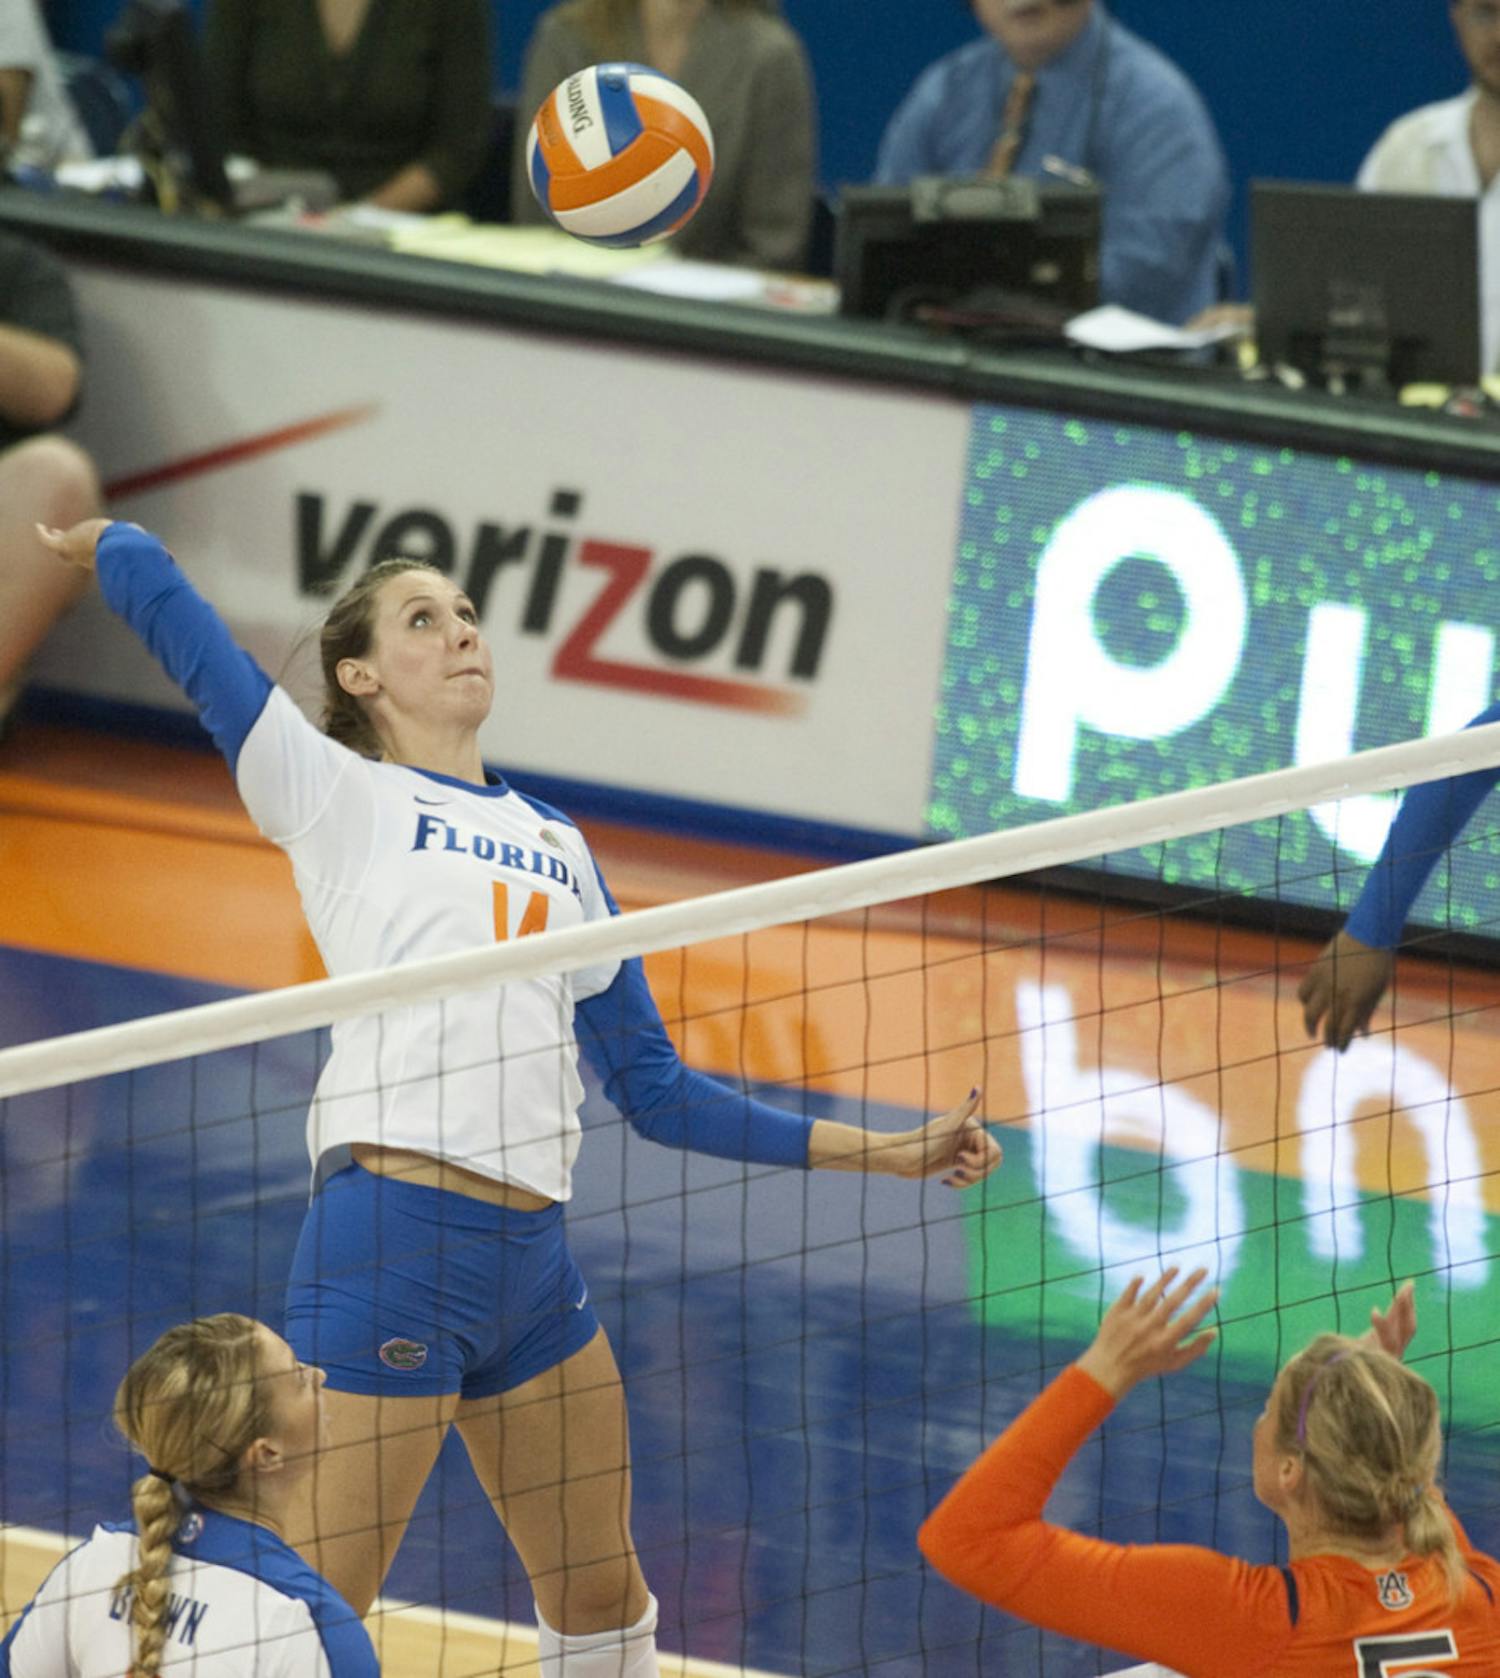 Senior middle blocker Betsy Smith combined with Tangerine Wiggs and Chloe Mann to record a season high in blocks per match. Florida defeated Louisiana Lafayette and Georgia Tech Saturday in the Stephen C. O'Connell Center.